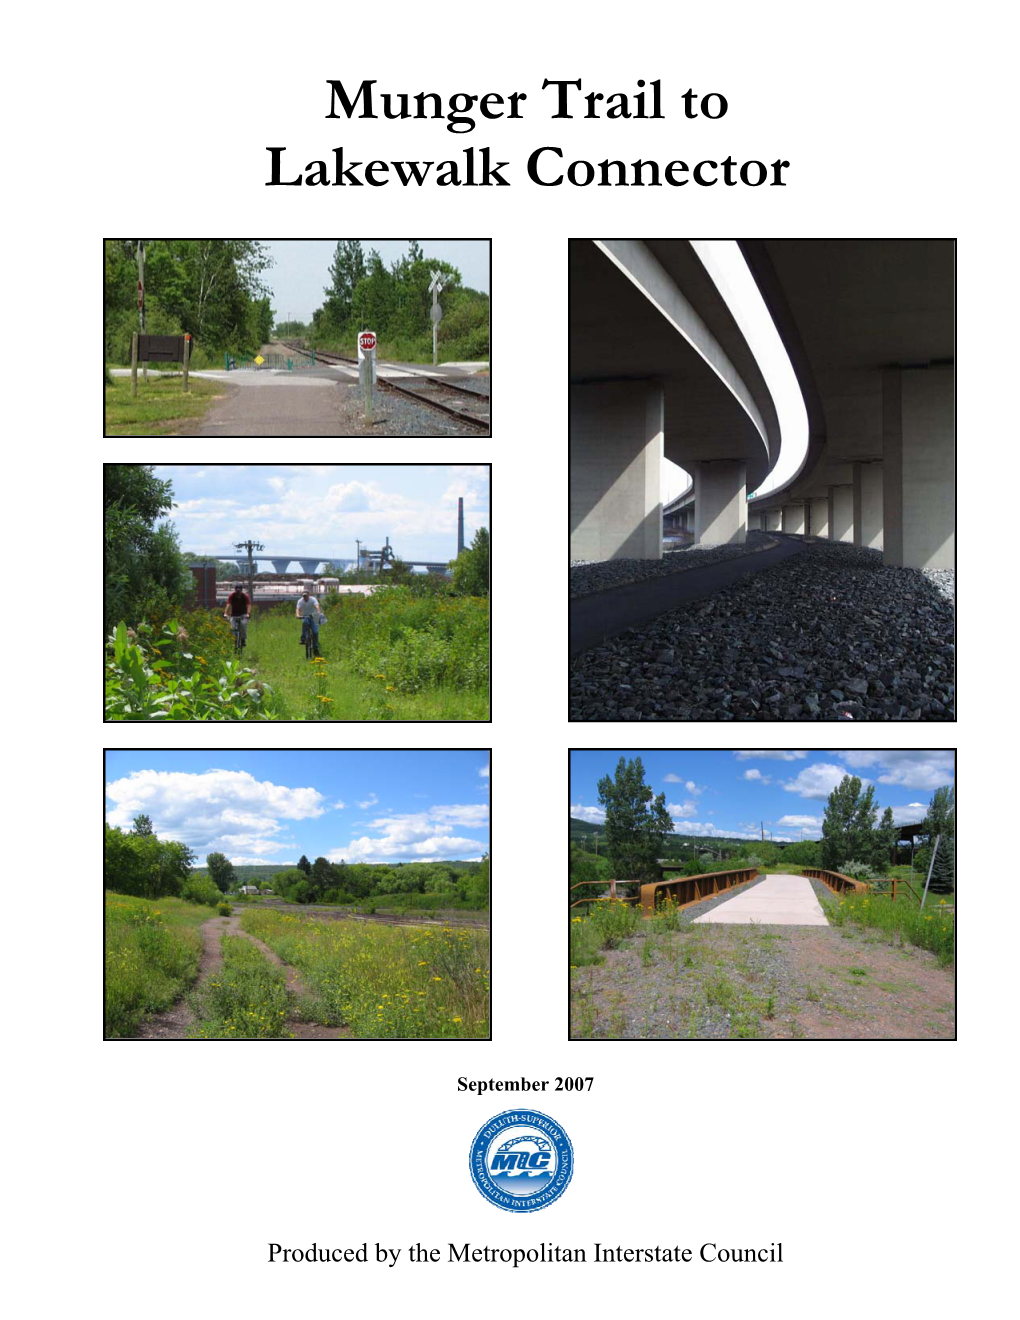 Munger Trail to Lakewalk Connector